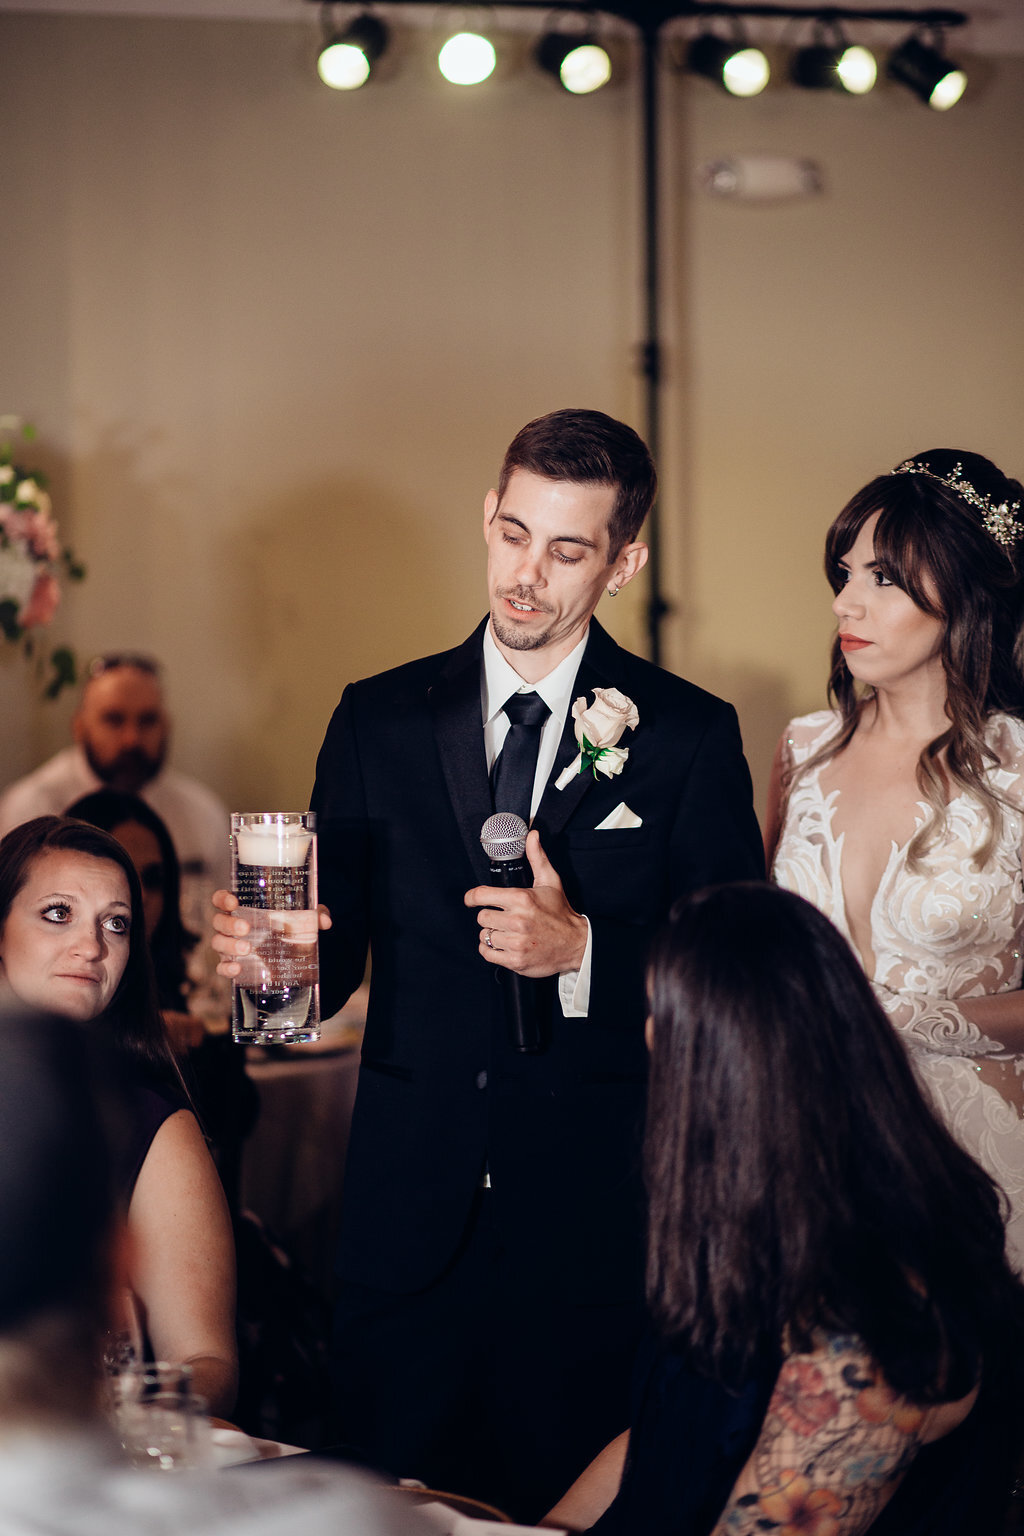 Wedding Photograph Of Groom Holding a Microphone And a Glass Los Angeles